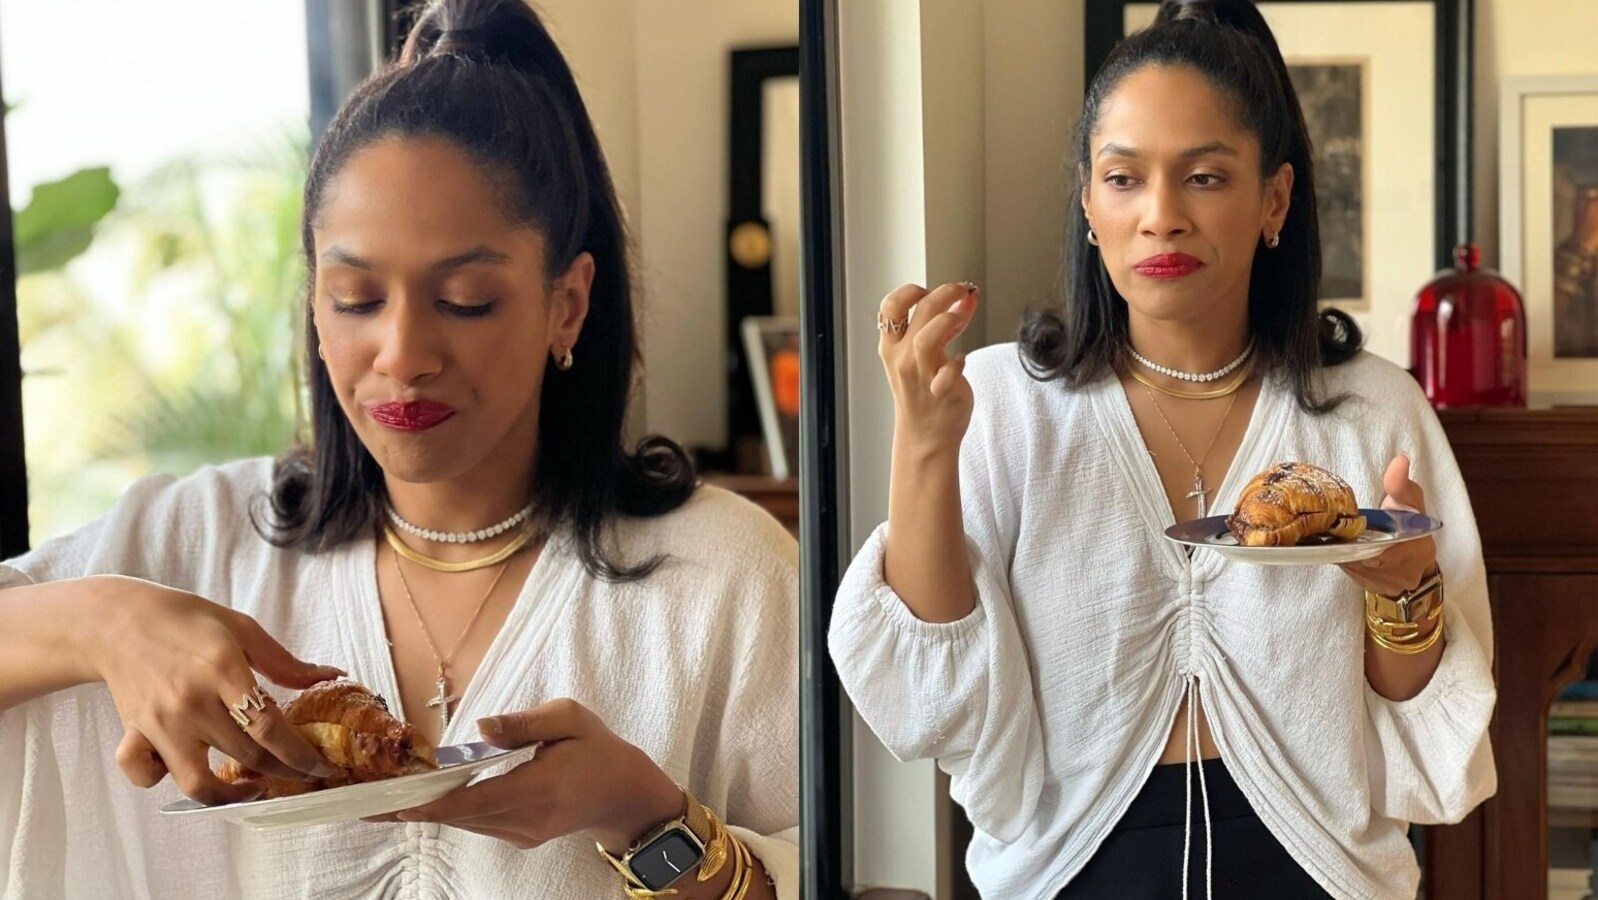 Masaba Gupta reveals her worst dates, says she was judged for eating ‘aloo and rice’